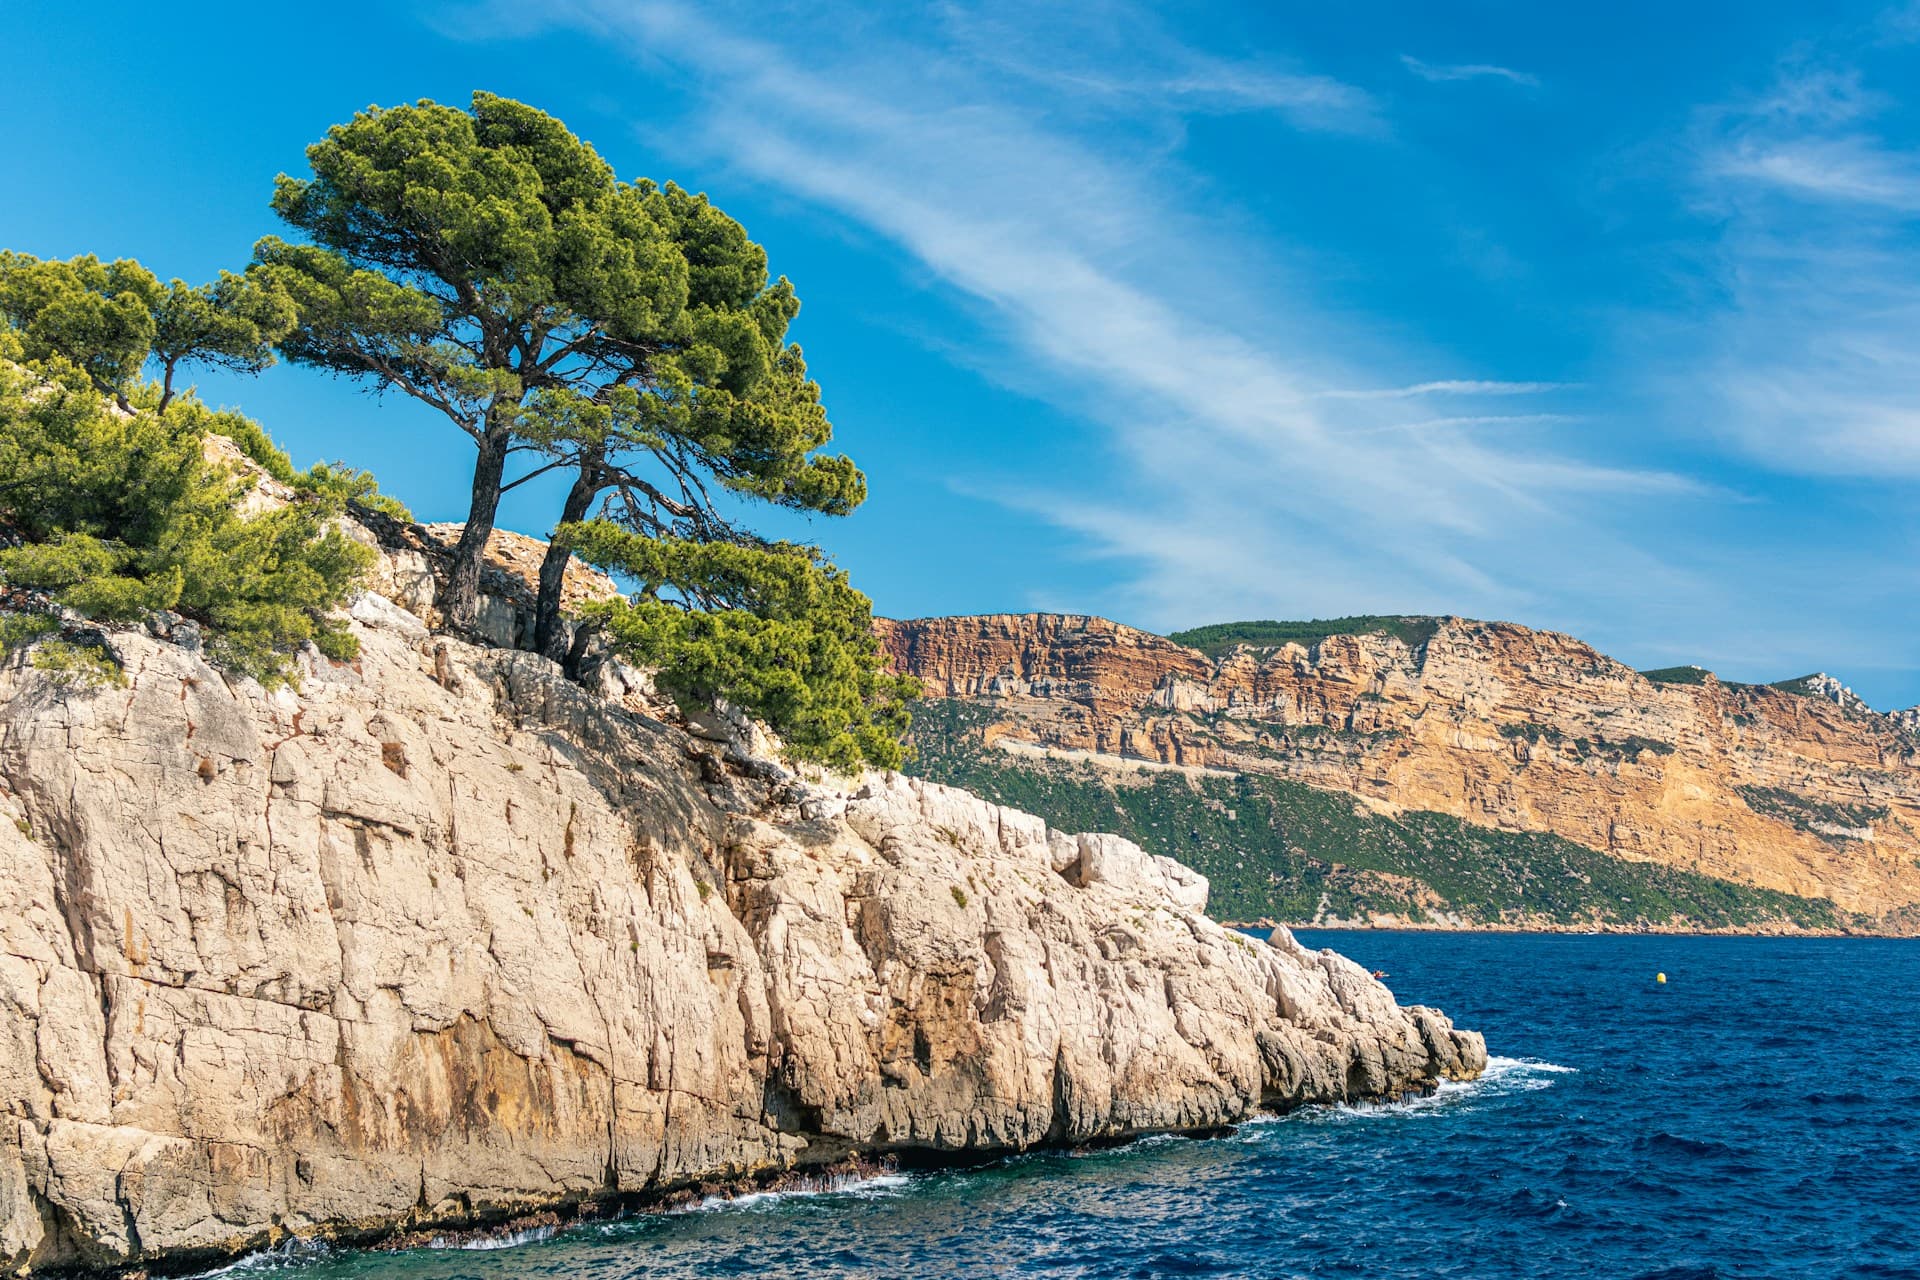 Calanques near Marseille on the French Riviera